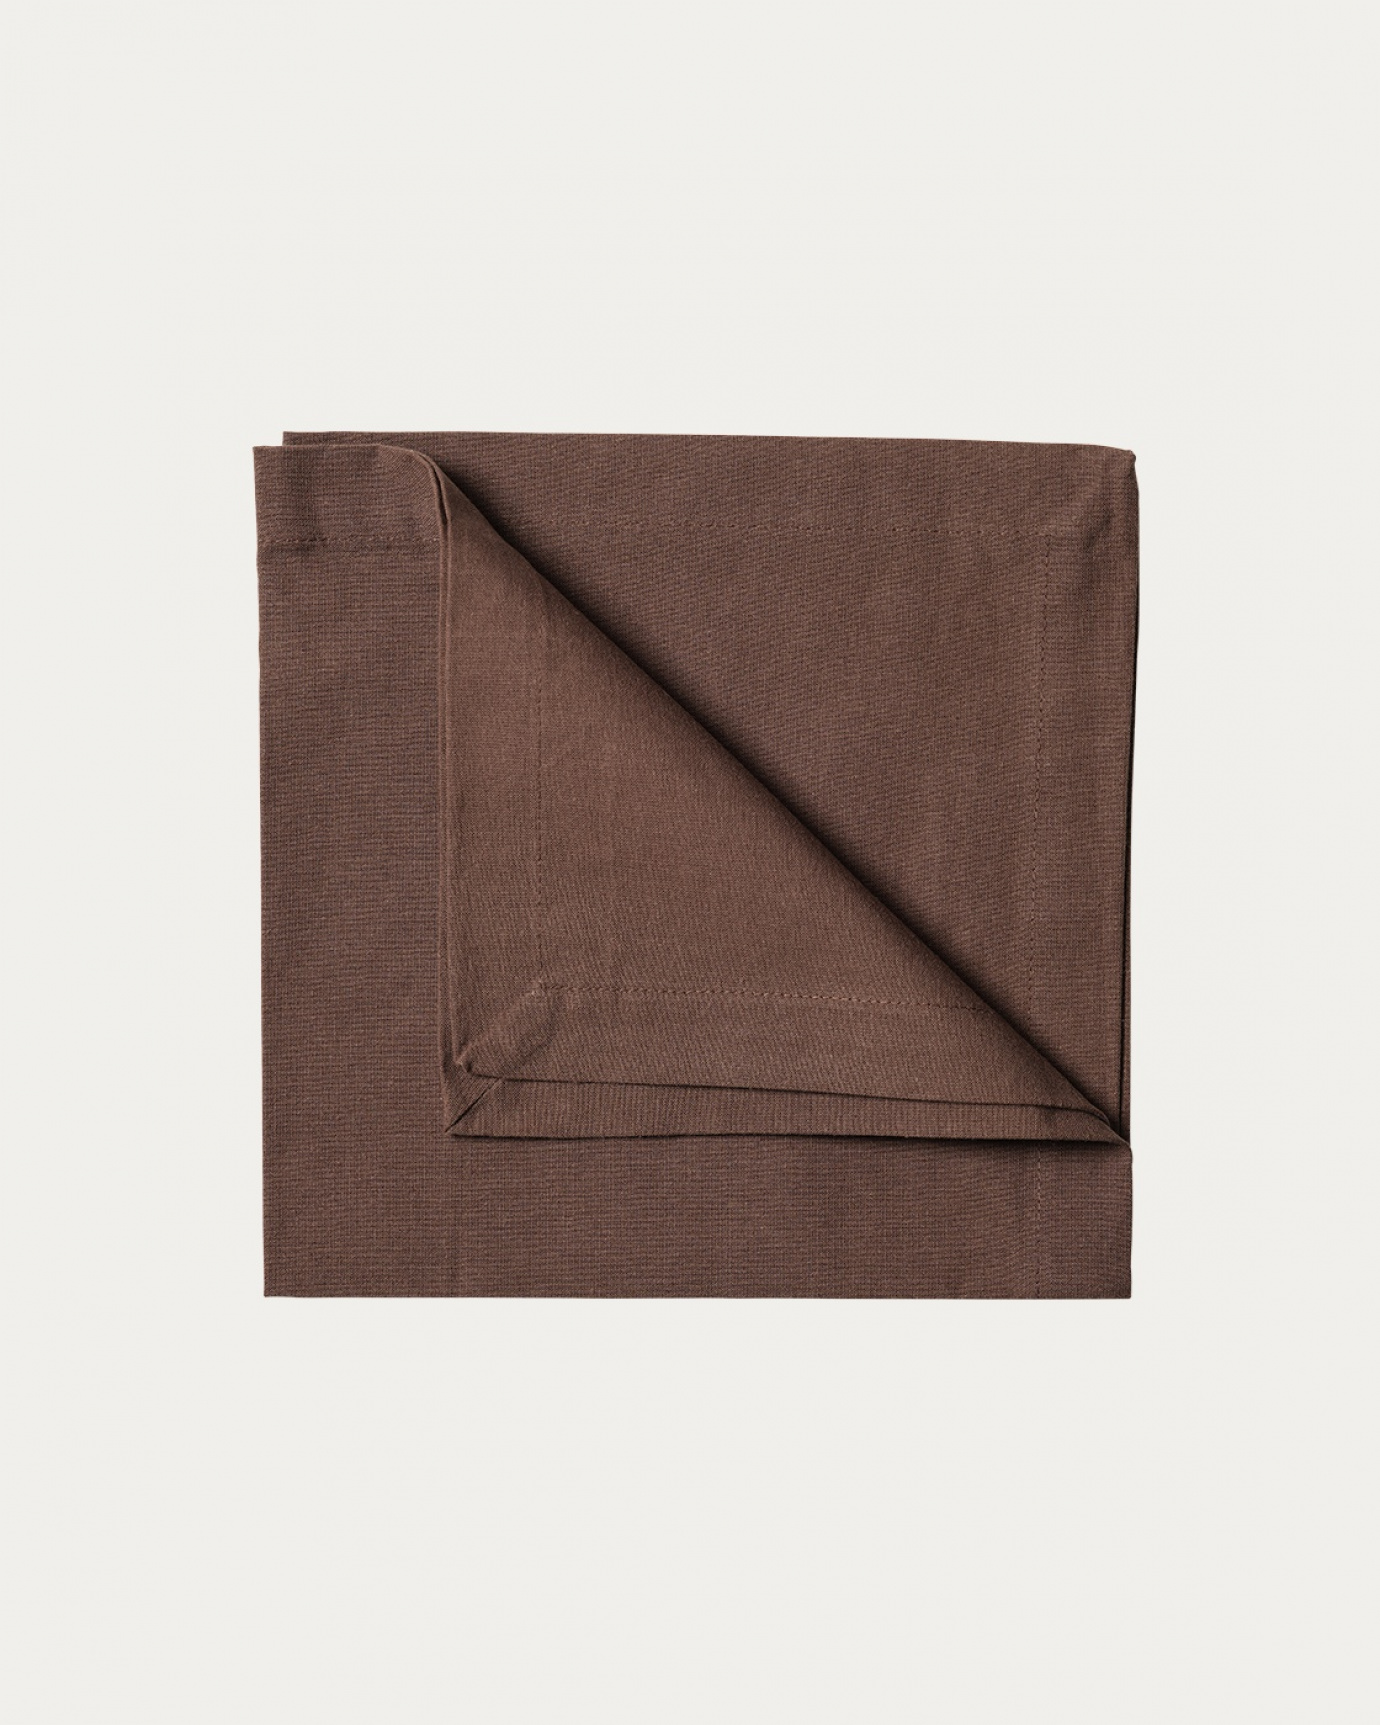 Product image bear brown ROBERT napkin made of soft cotton from LINUM DESIGN. Size 45x45 cm and sold in 4-pack.